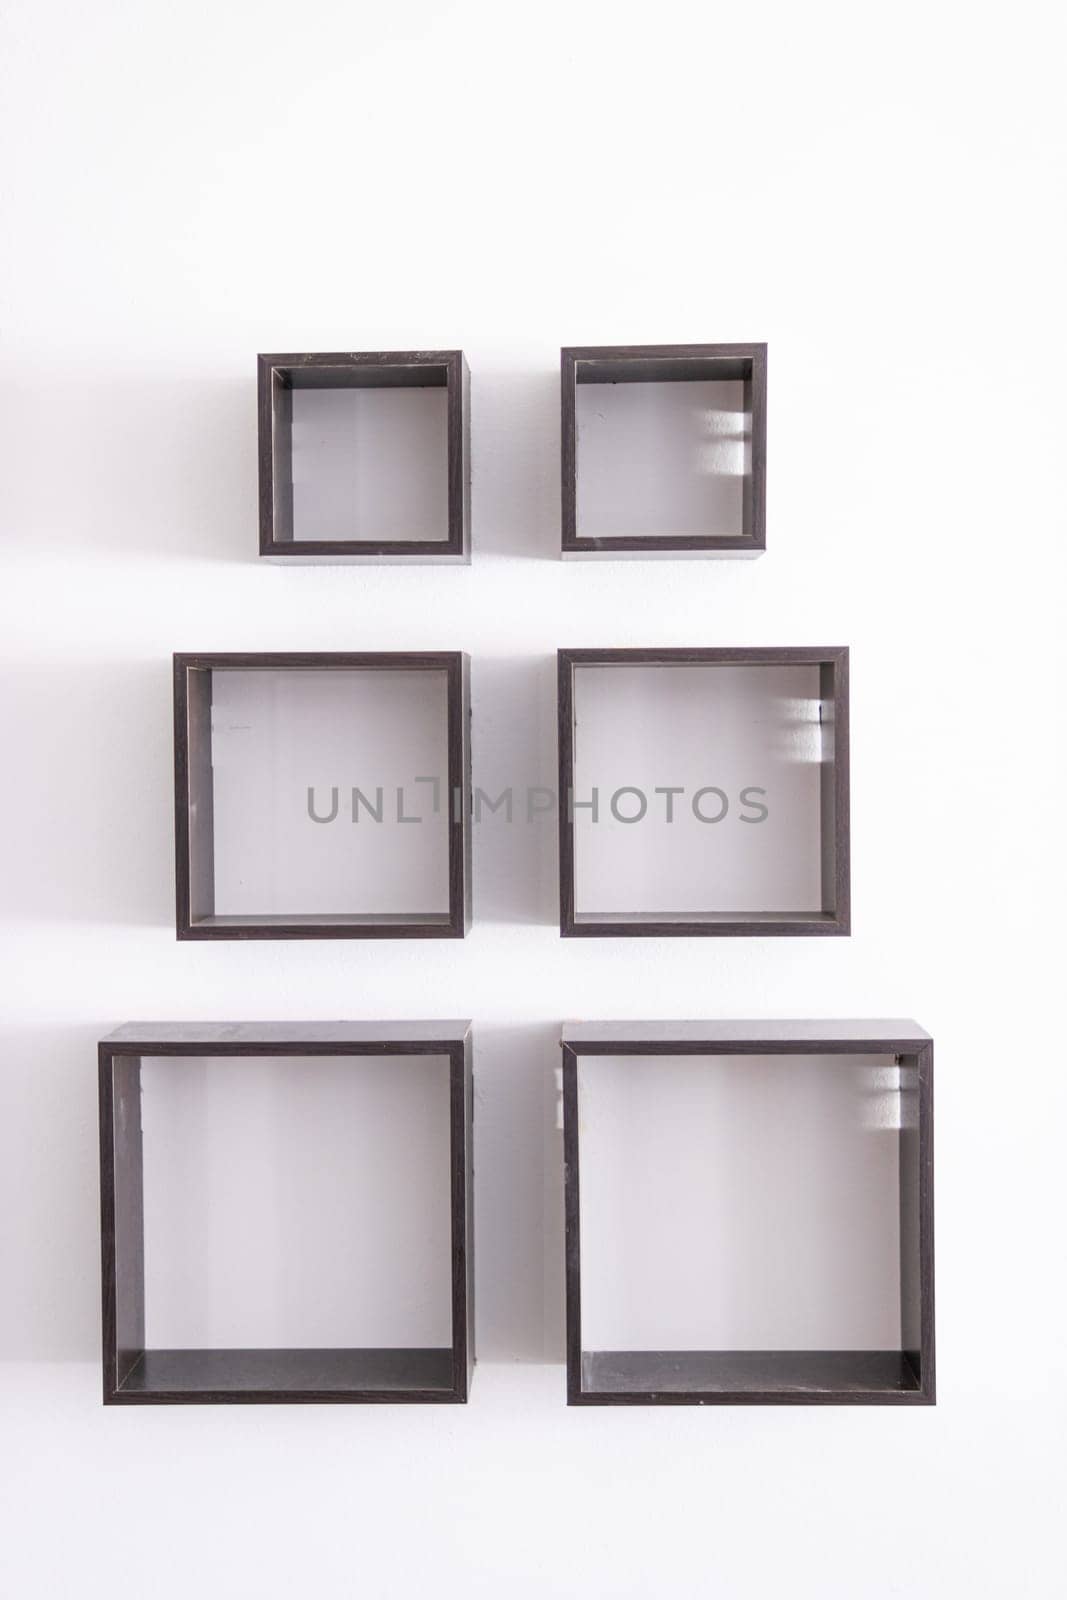 designer shelves on a white wall in an apartment.Design concept by PopOff